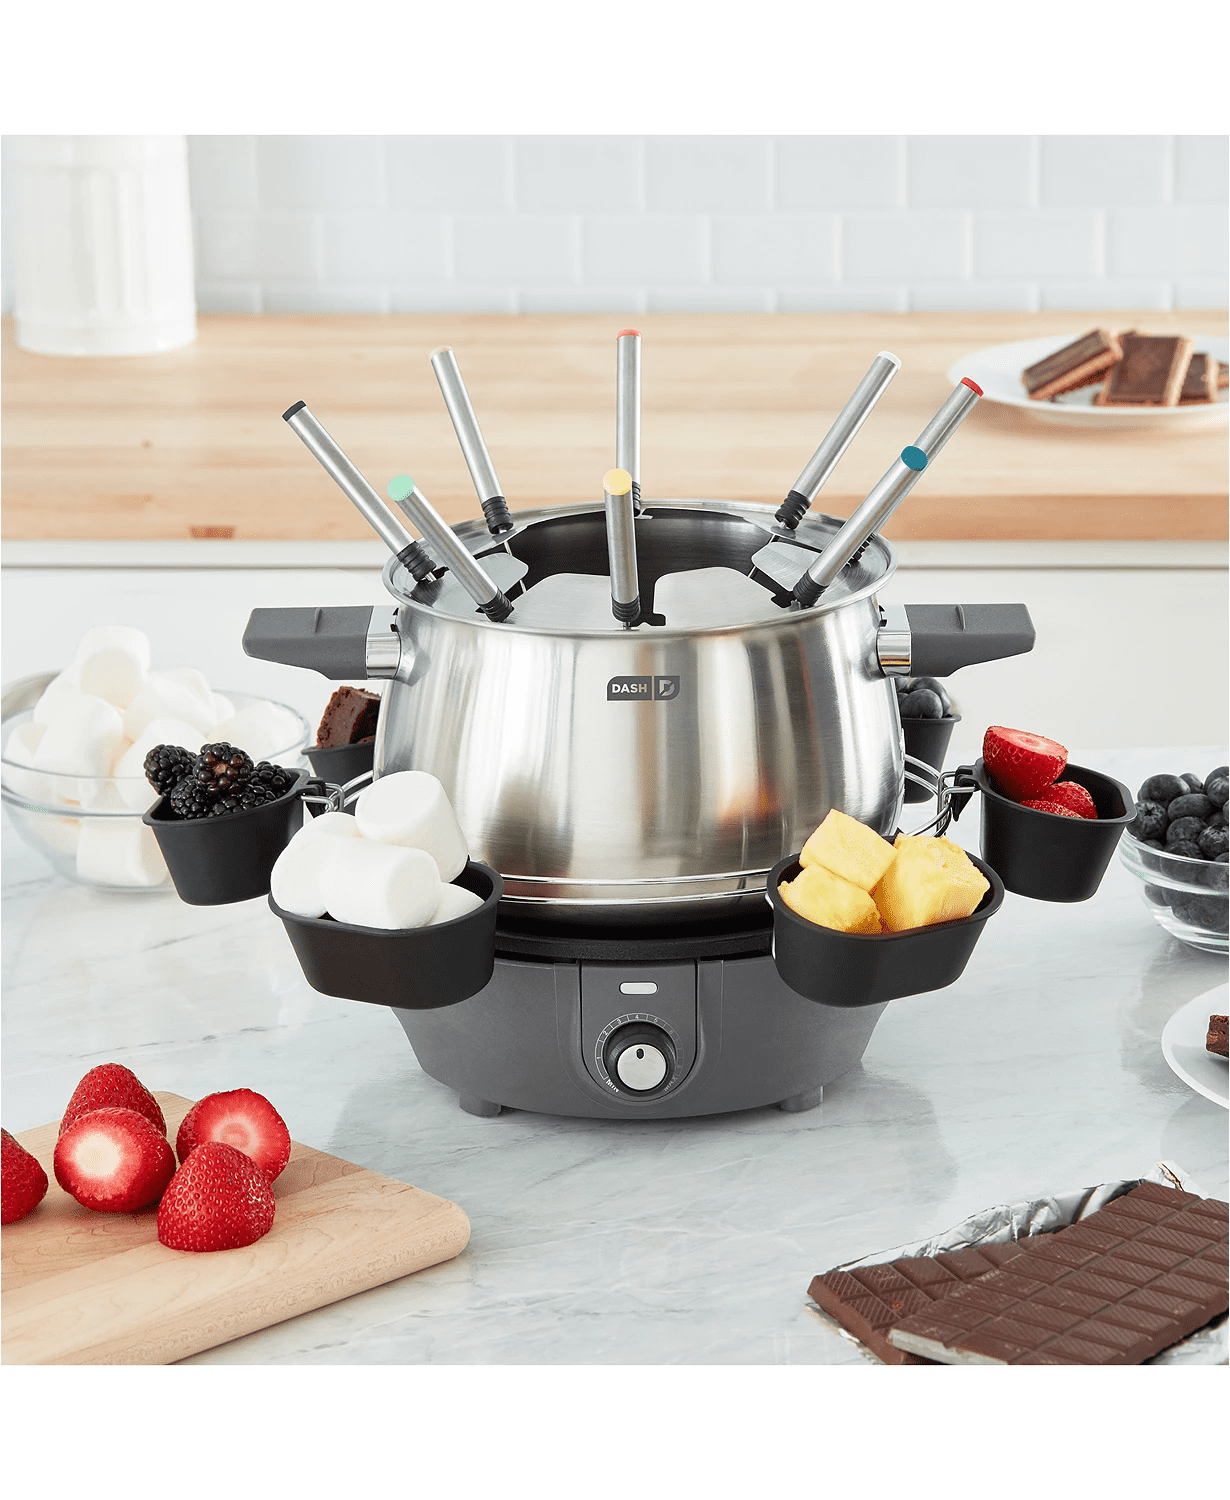  Dash Deluxe Stainless Steel Fondue Maker with Temperature  Control, Fondue Forks, Cups, and Rack, with Recipe Guide Included, 3-Quart,  Non-Stick – Aqua: Home & Kitchen